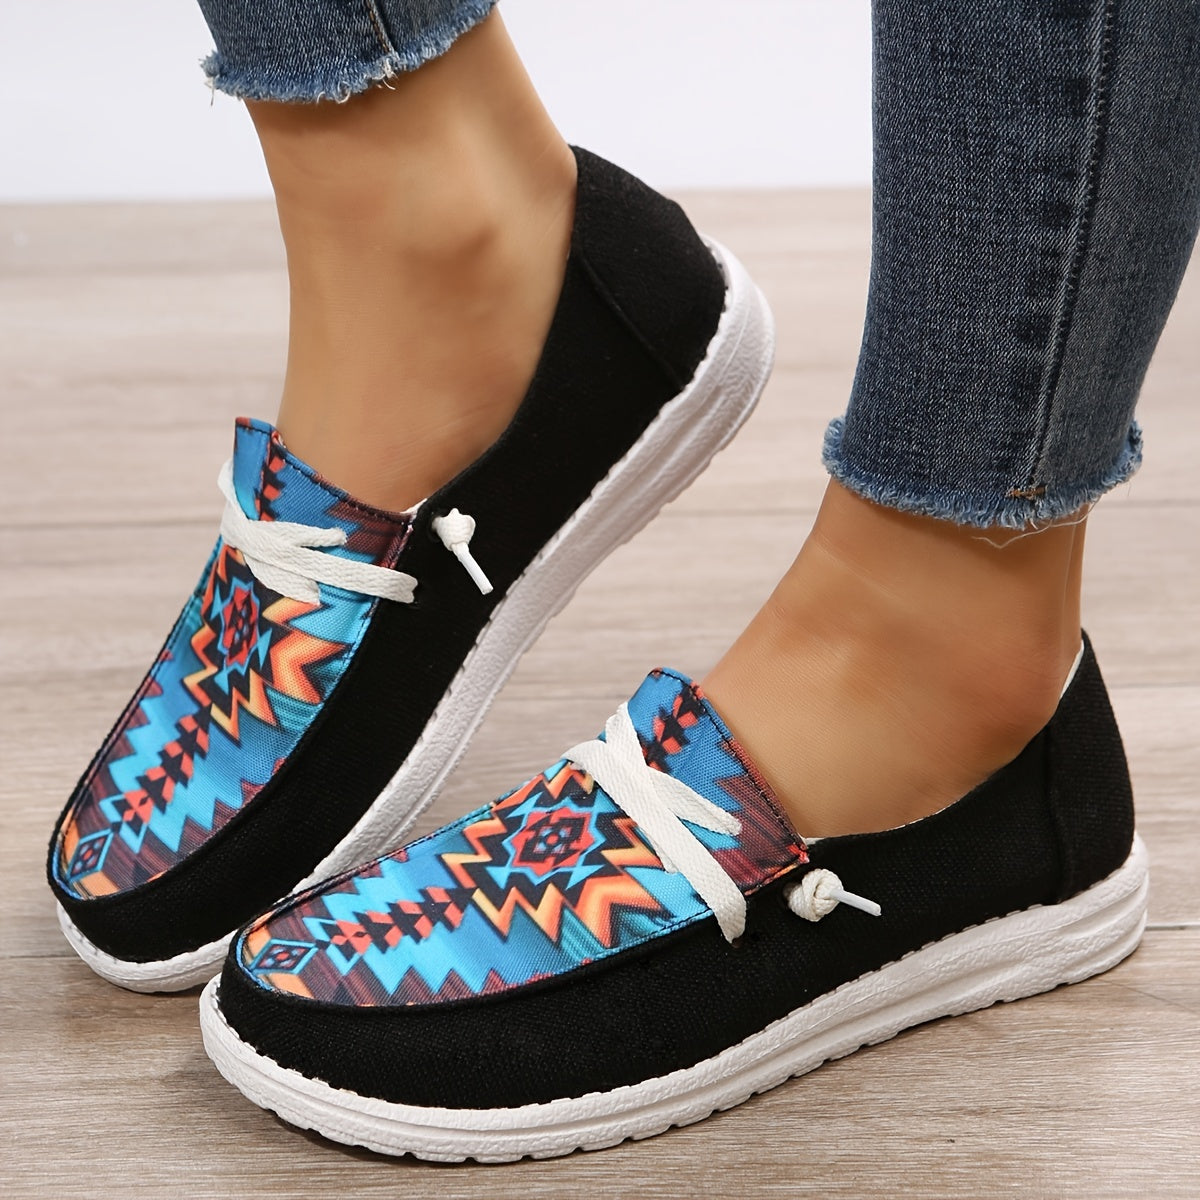 Geometric Flat Canvas Shoes, Lightweight Non-slip Low Tops